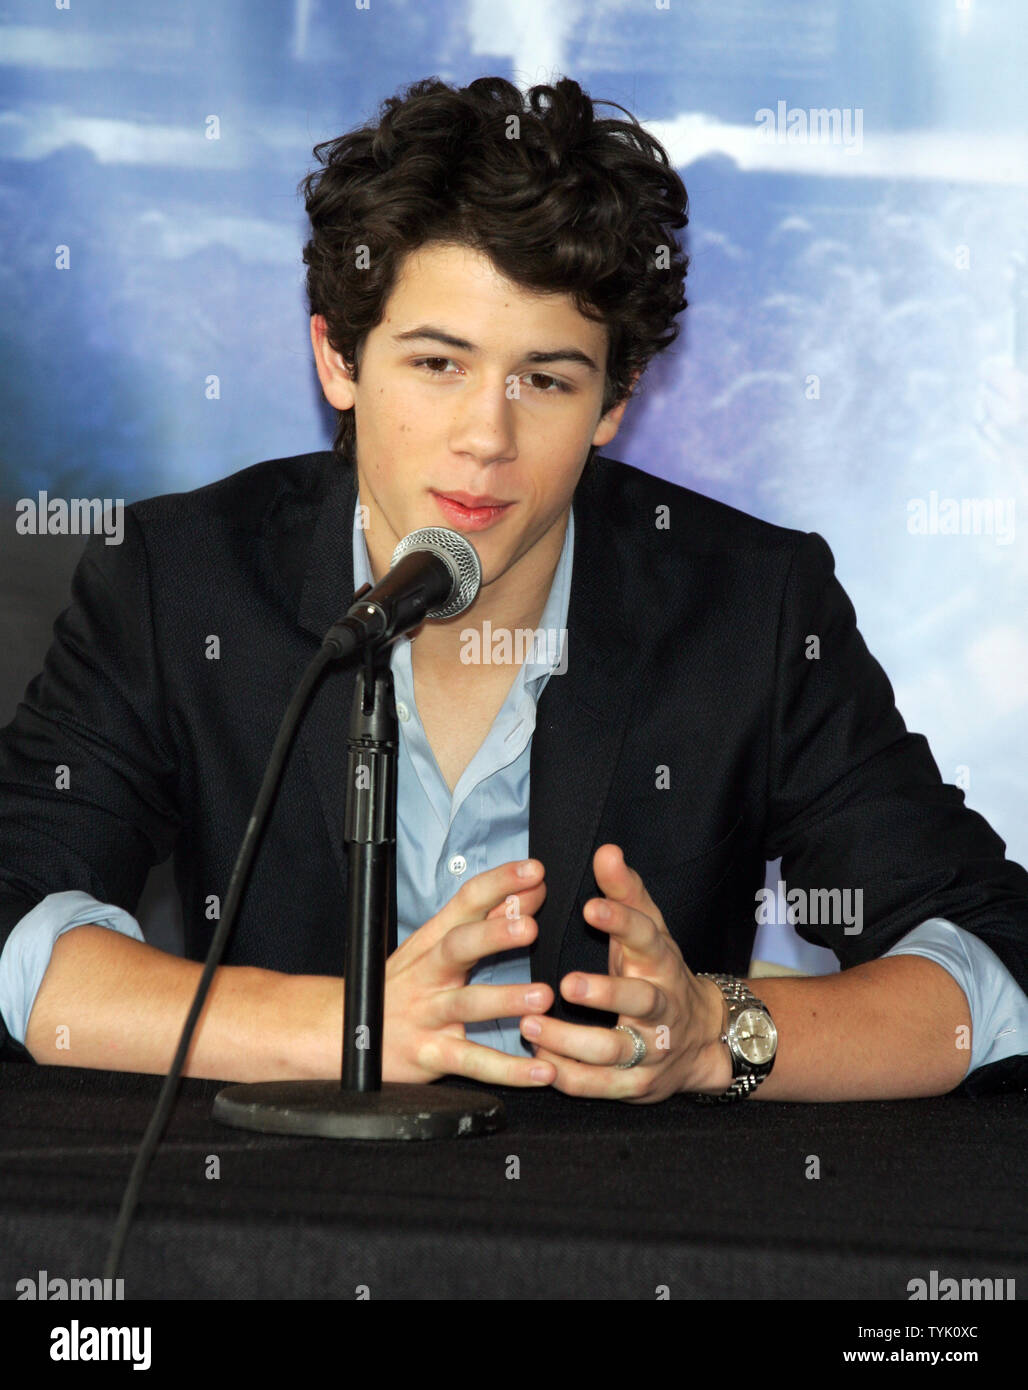 The Jonas Brothers' Nick Jonas attends a press conference about embarking on their "Surprise Theater Invasion" at the Westchester Airport in New York on February 28, 2009.  (UPI Photo/Laura Cavanaugh) Stock Photo